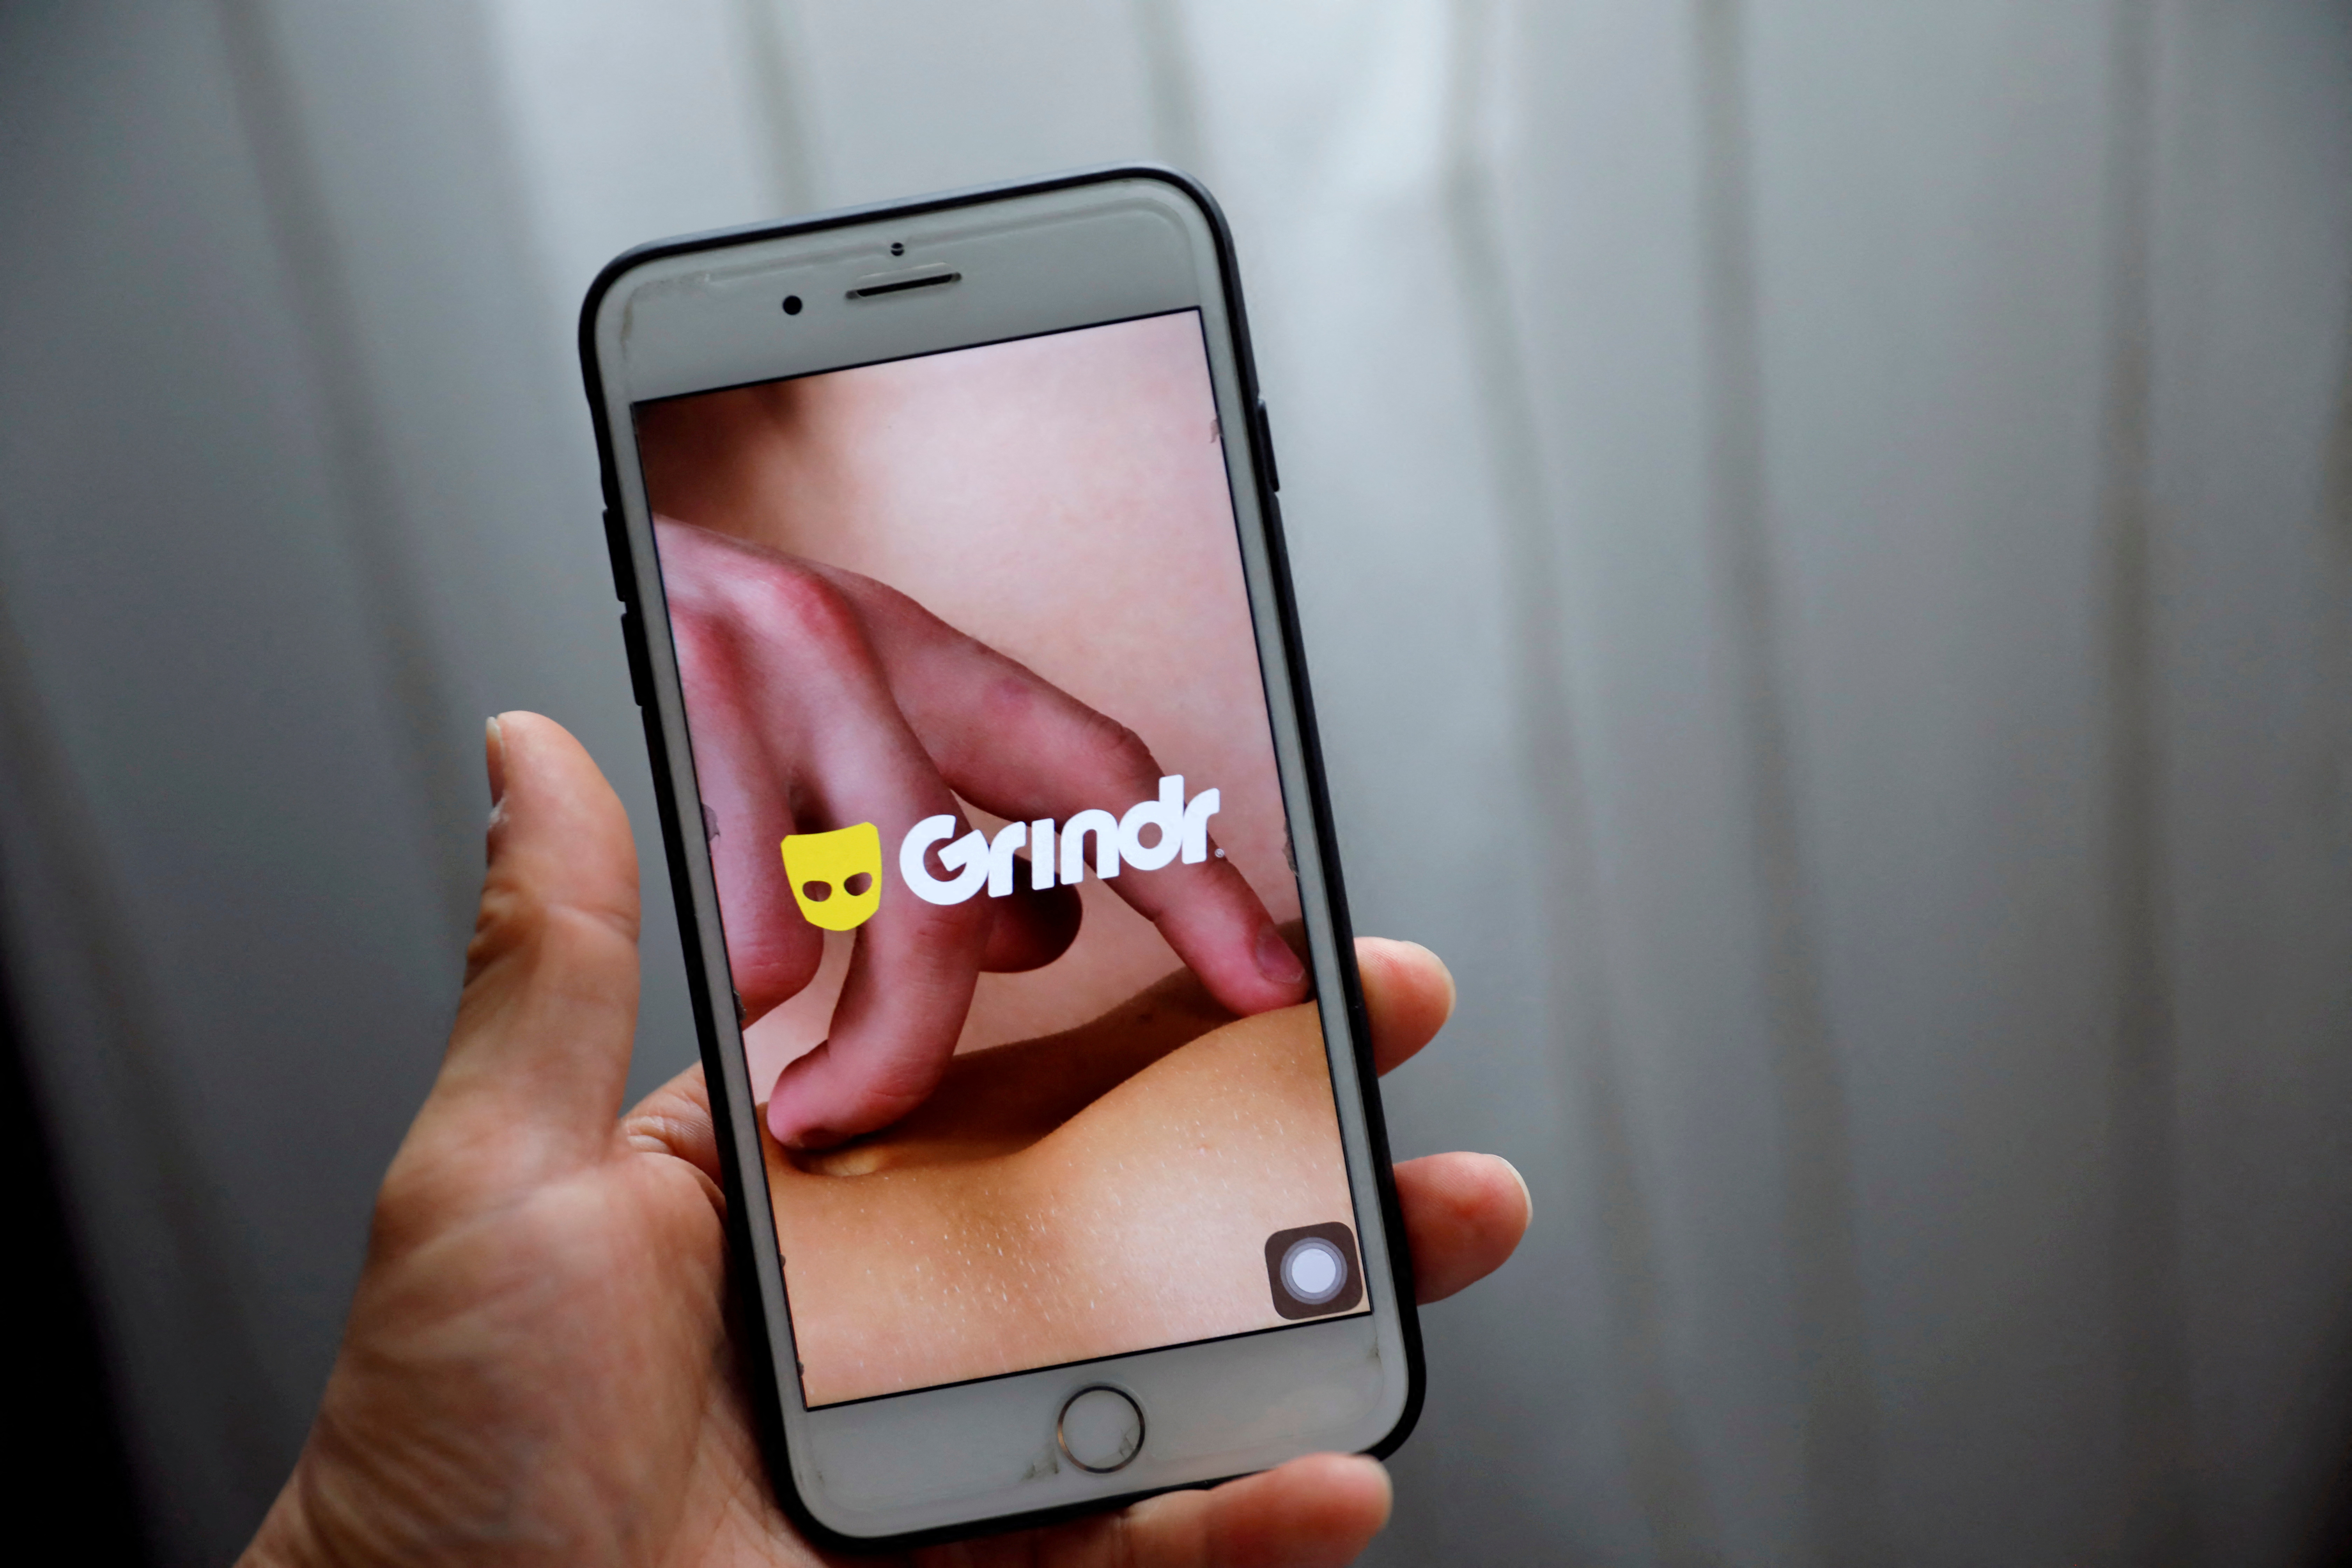 Grindr disappears from app stores in China ahead of 2022 Winter Olympics